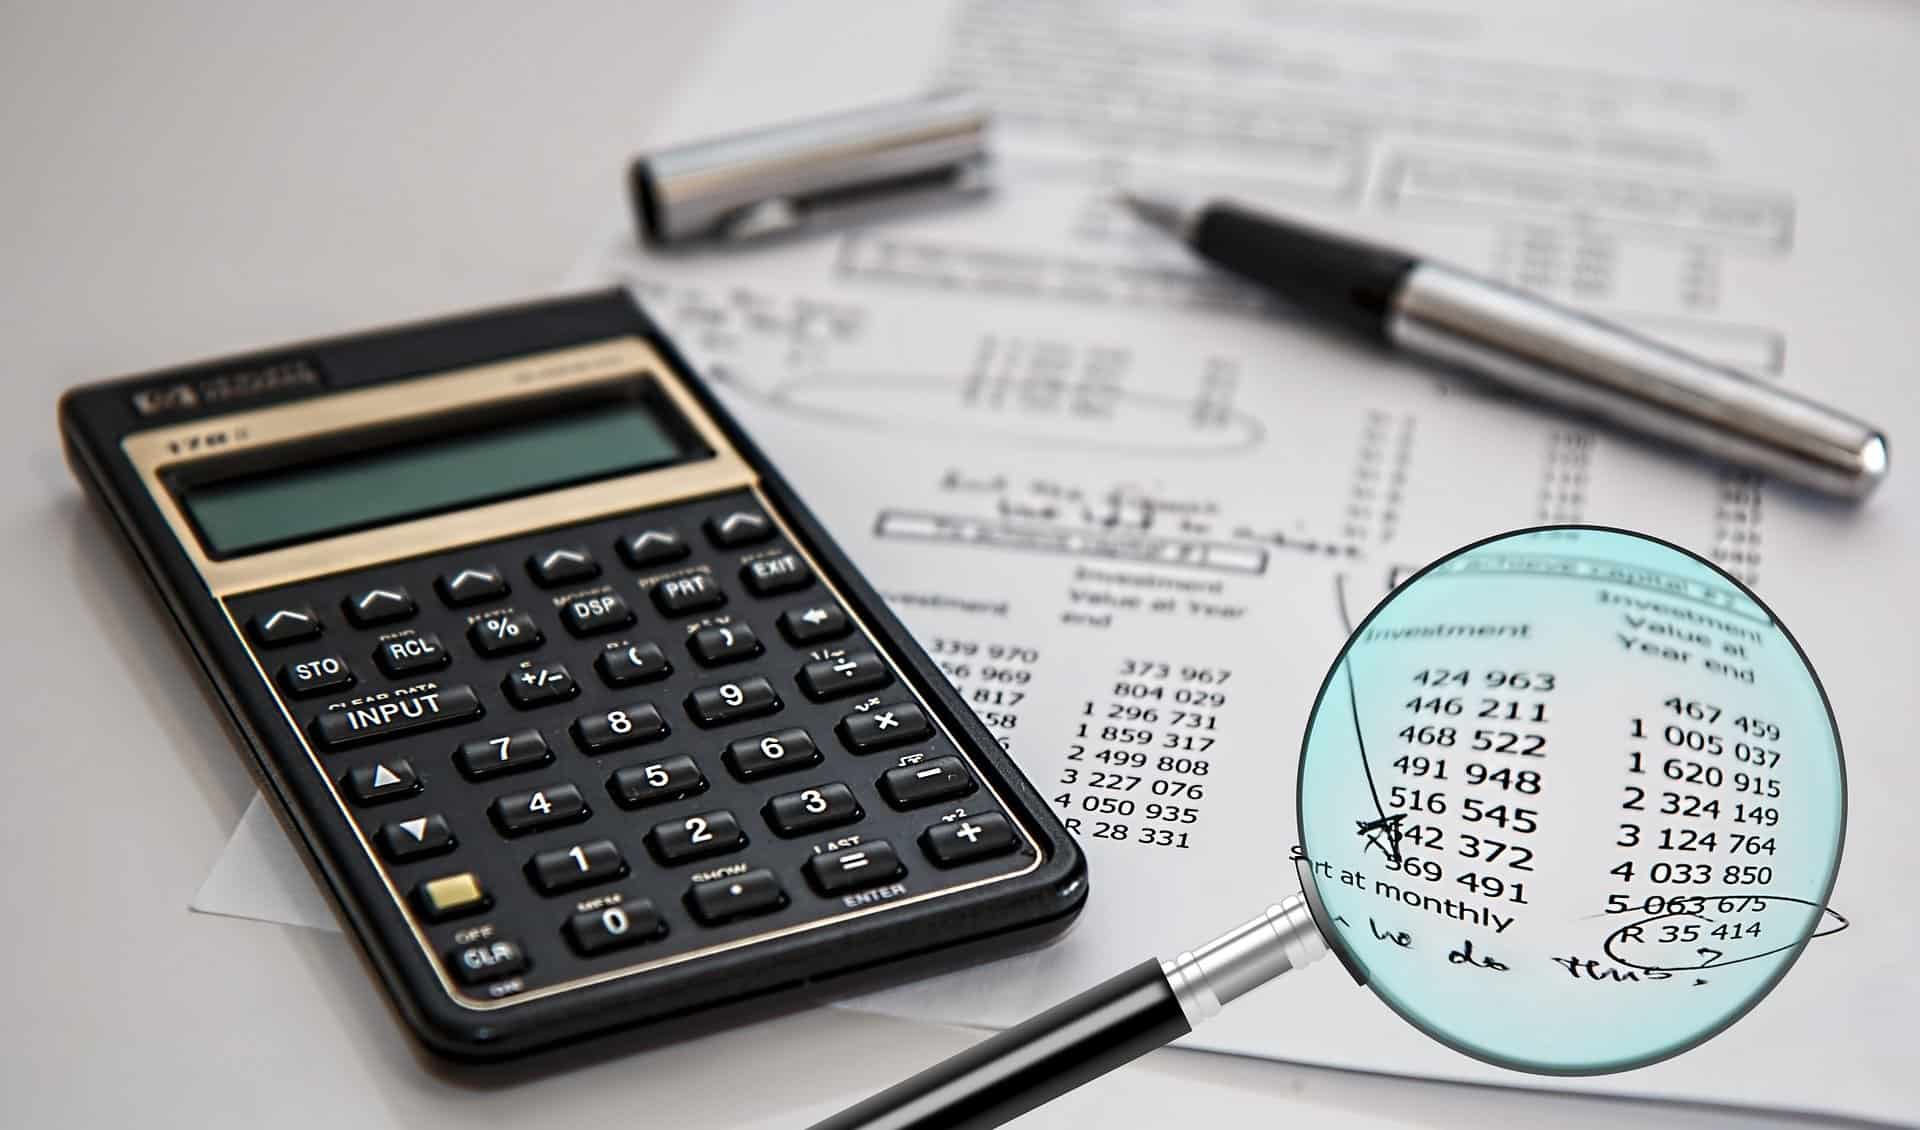 A magnifying glass is used to focus on a section of some bills calculated on a sheet of paper next to an open pen and a calculator